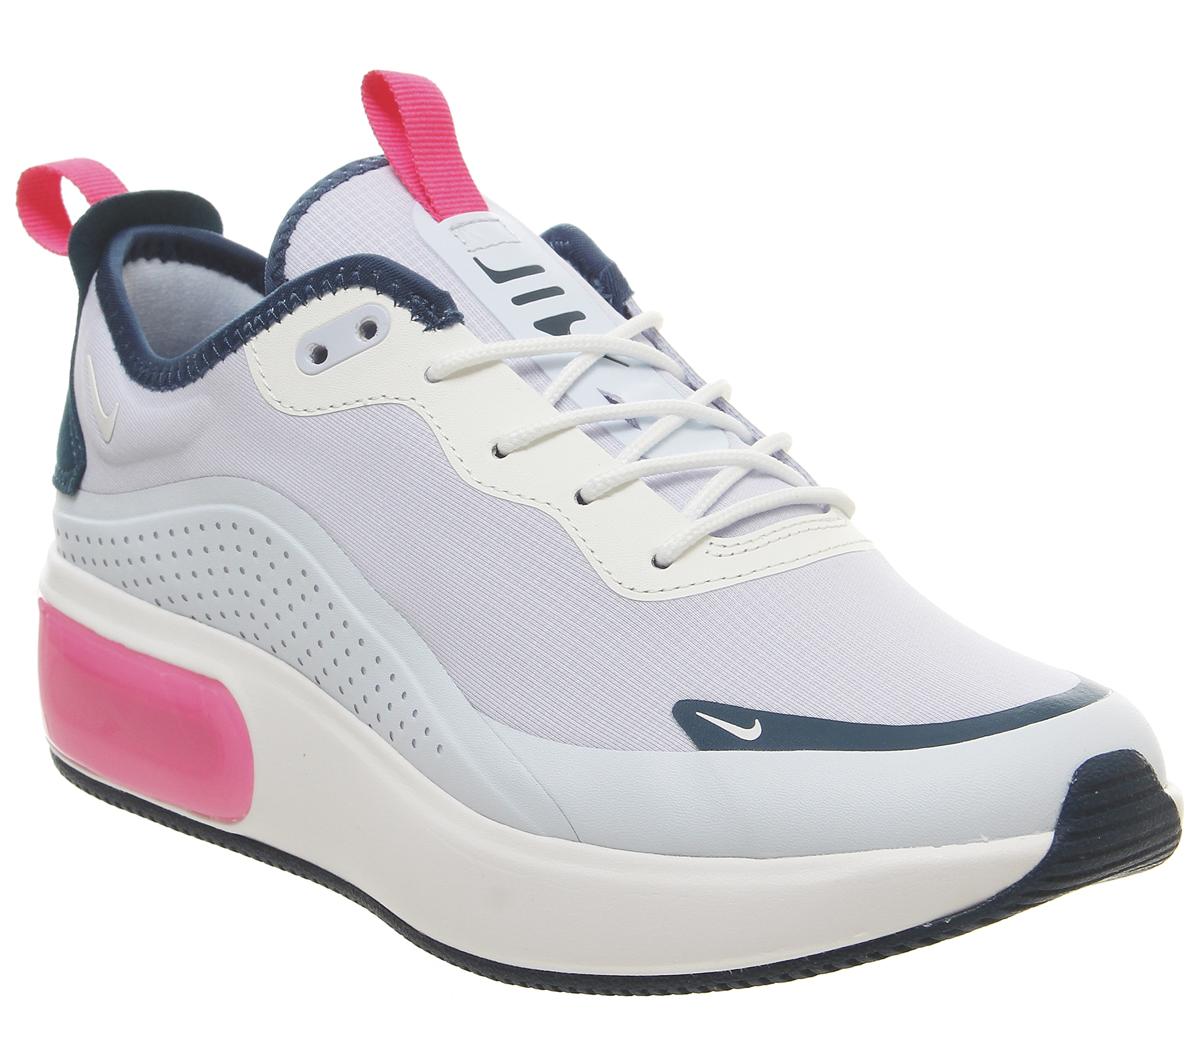 NikeAir Max Dia TrainersBlue Force Hyper Pink Summit White